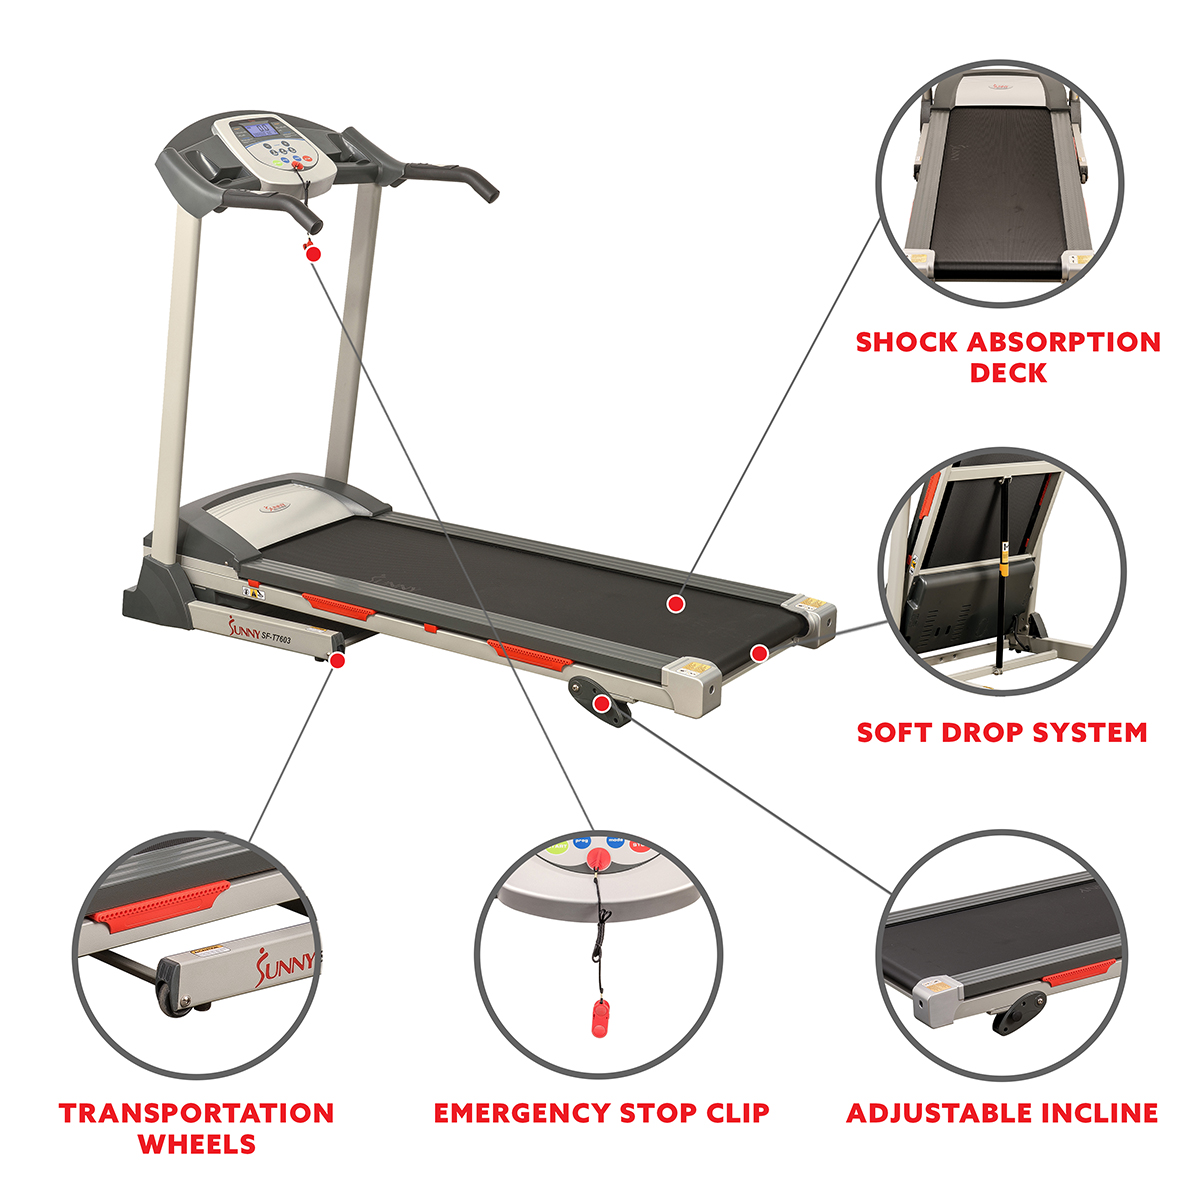 Sunny Health & Fitness Powerful Electric Treadmill for Home, Foldable, Manual Incline, Built-In Programs, Pulse Sensor, SF-T7603 - image 4 of 8